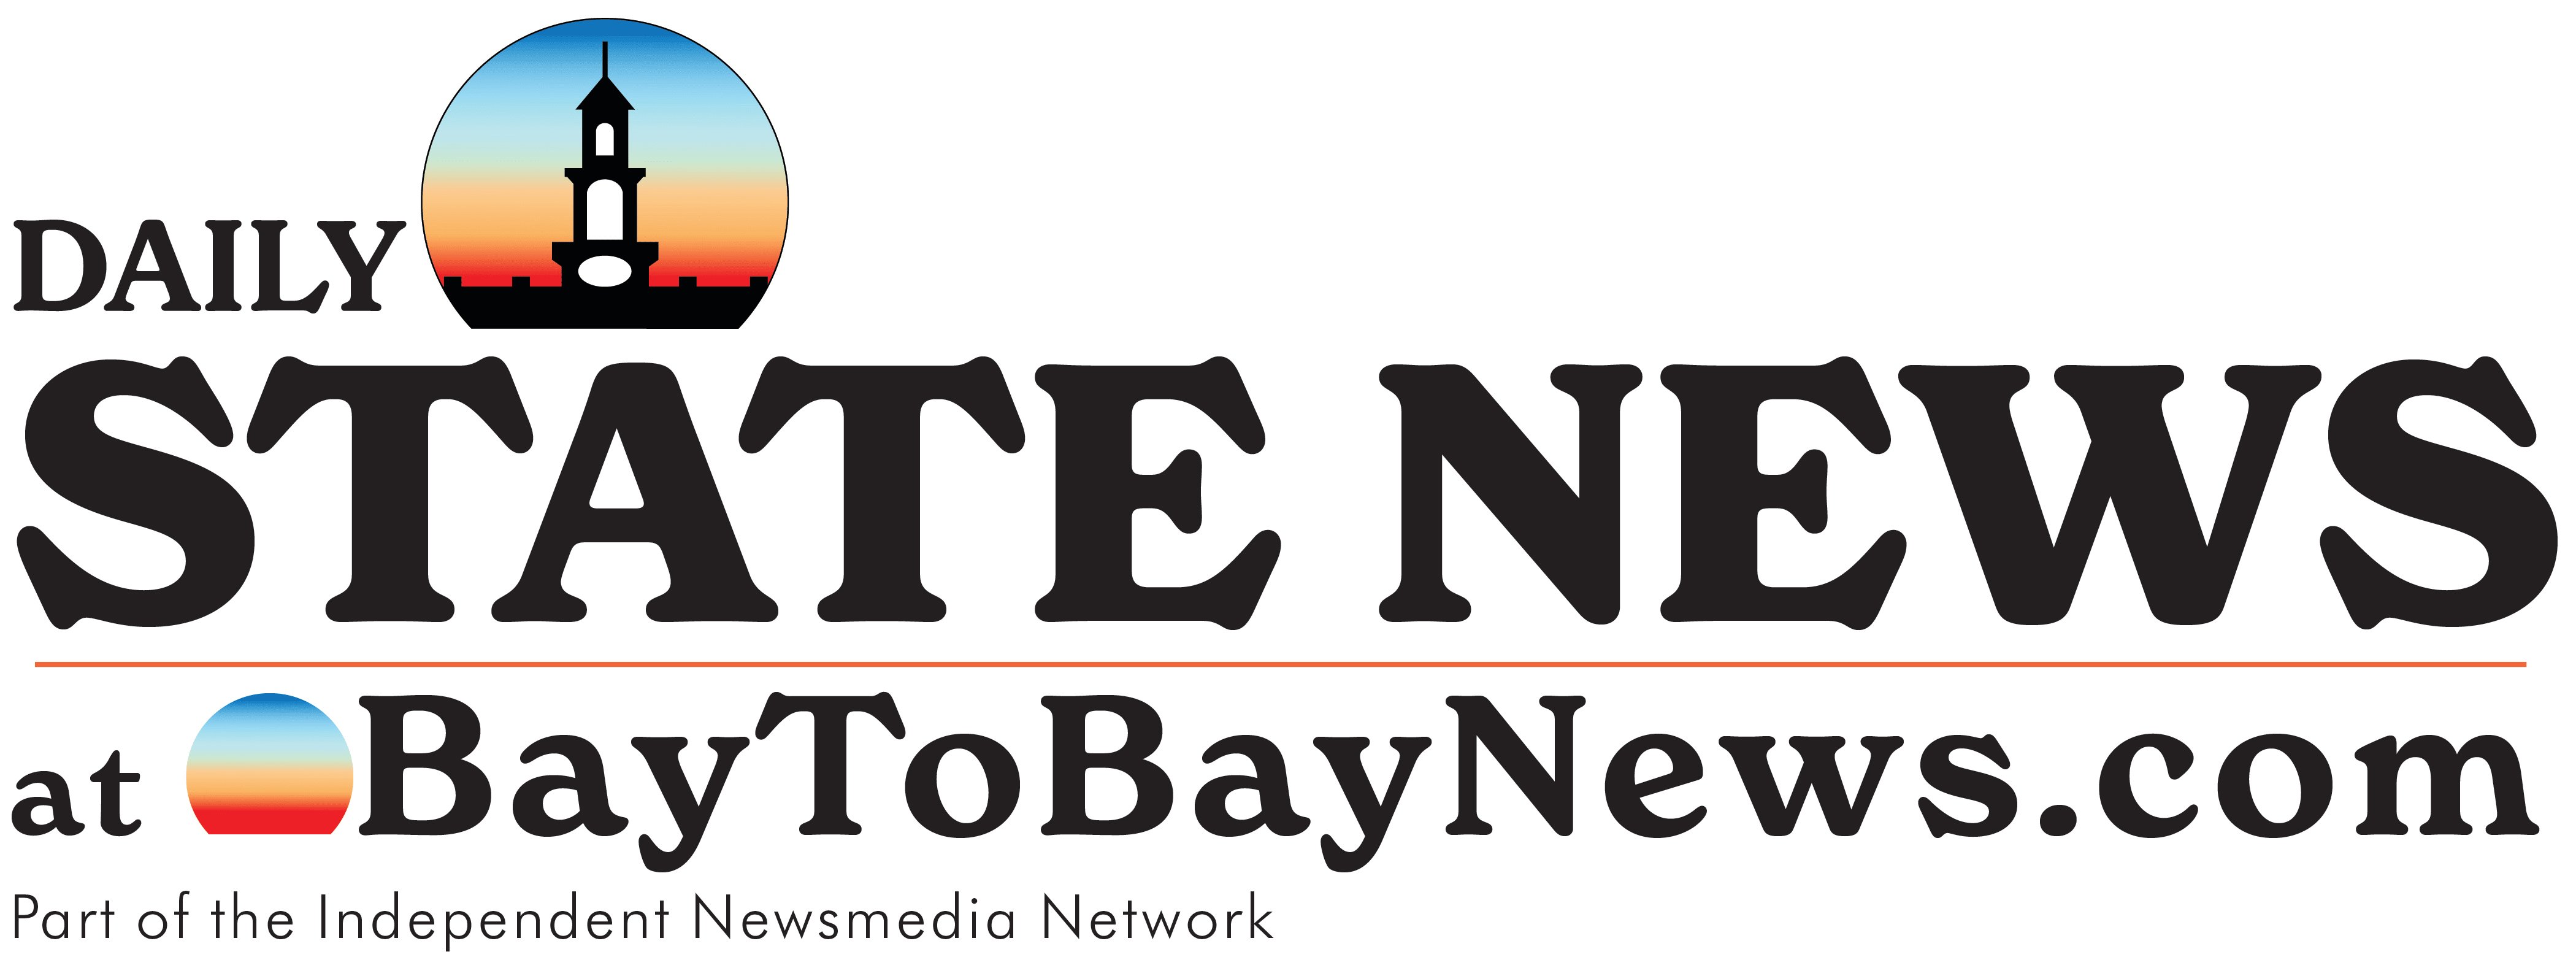 Daily State News